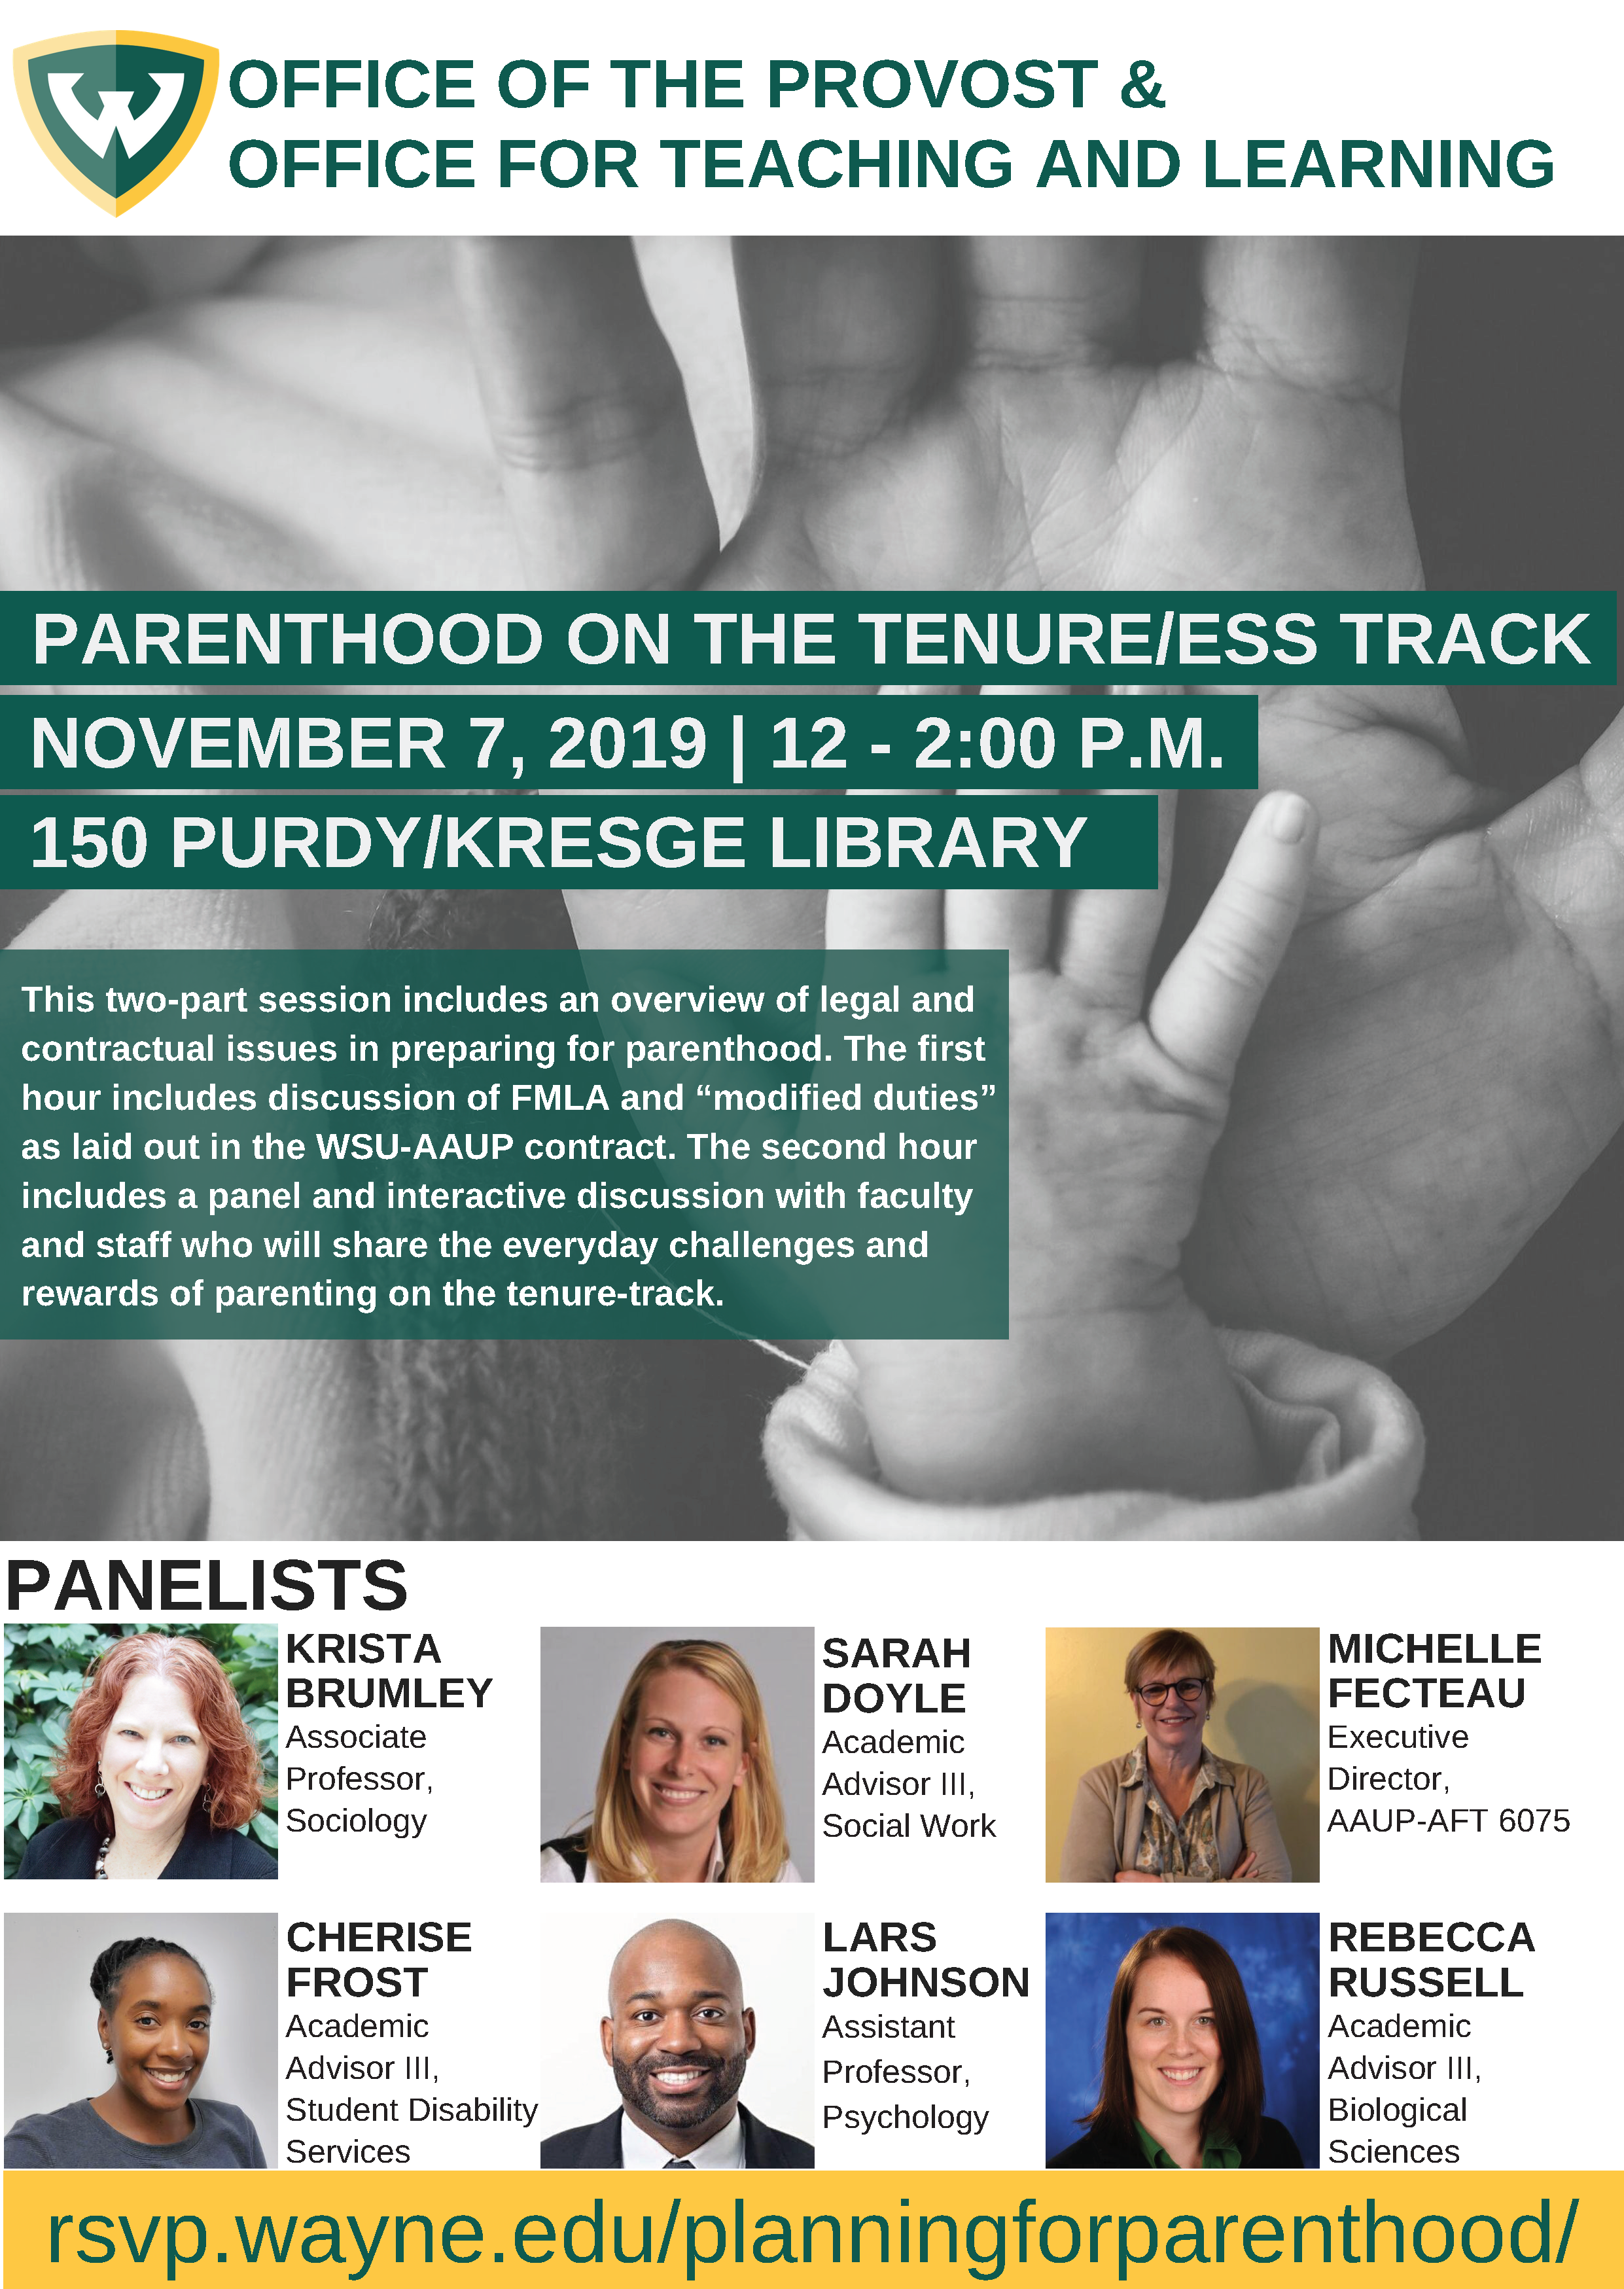 Parenthood on the Tenure/ESS Track Flyer